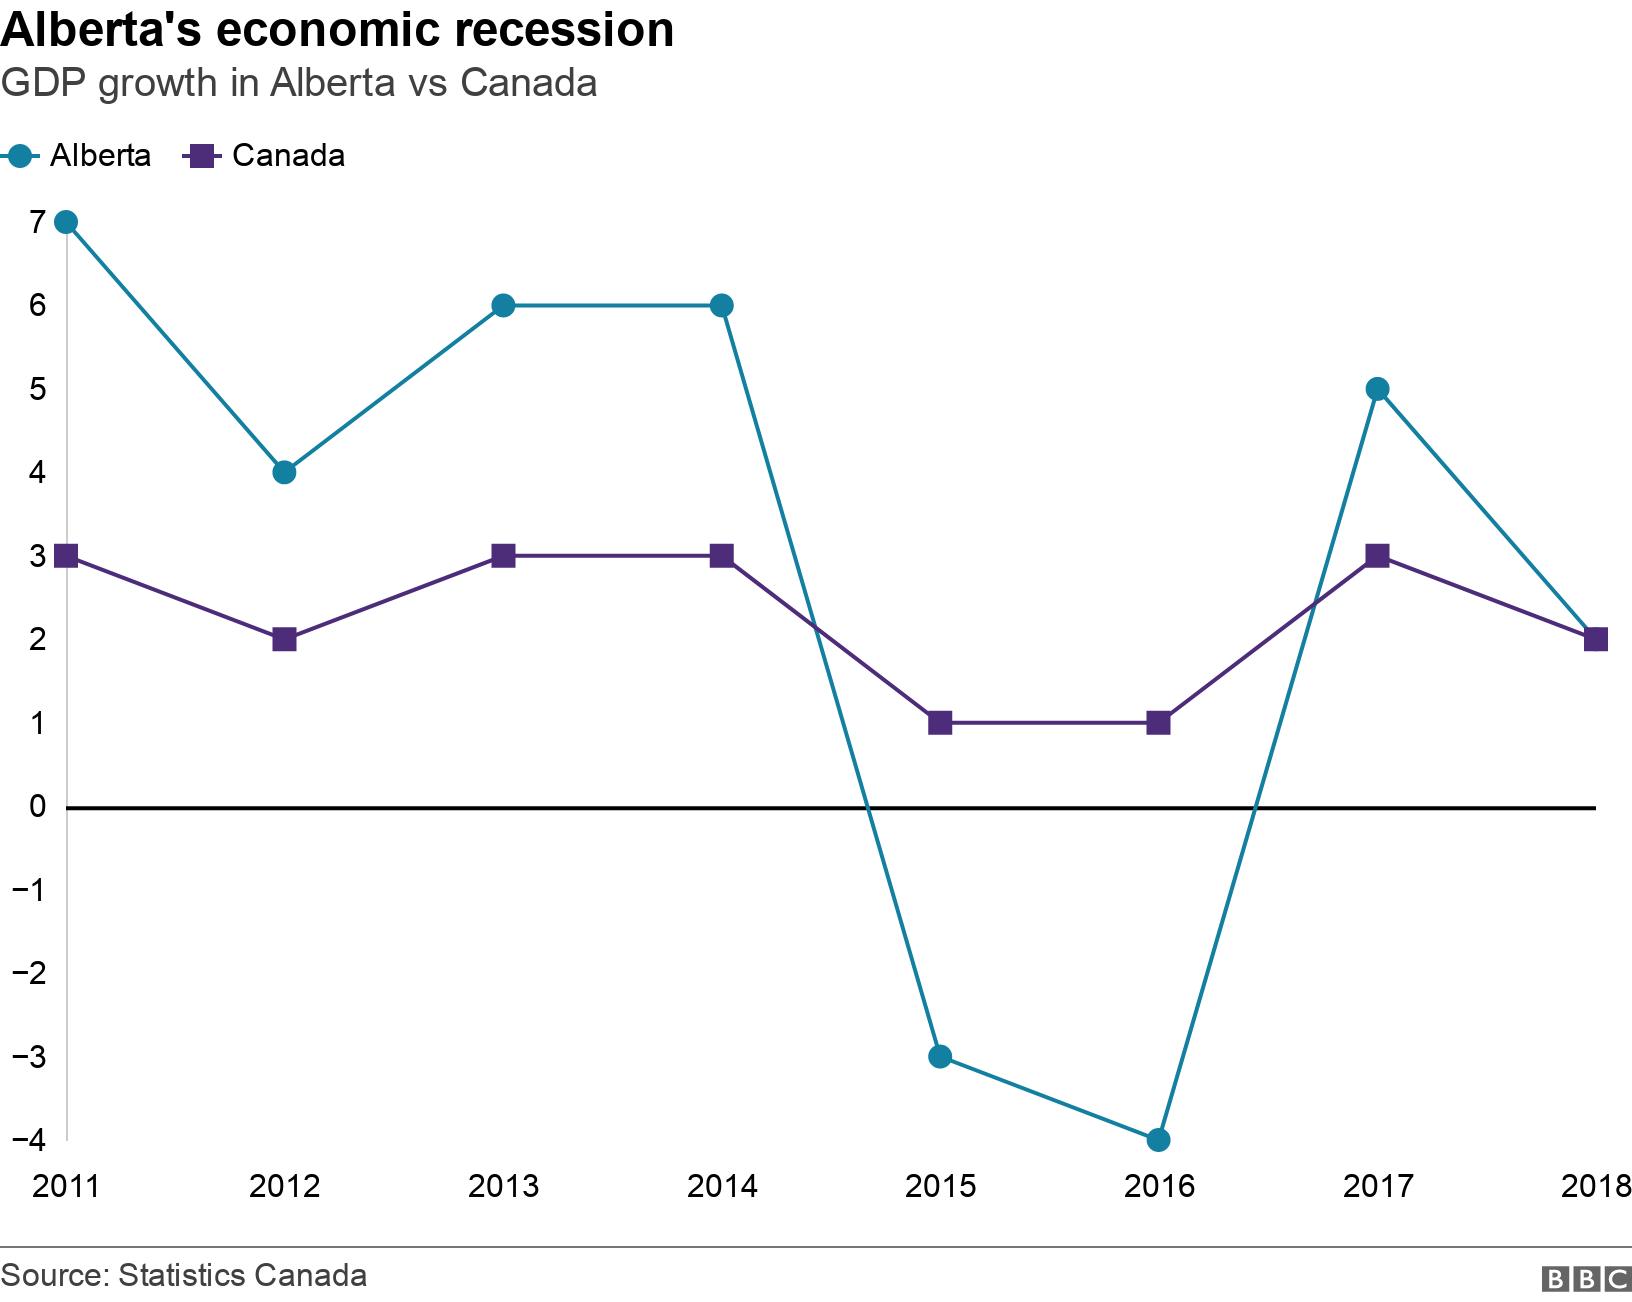 Alberta's economic recession. GDP growth in Alberta vs Canada. GDP growth in Alberta was well above the national average from 2011-2014, but plummeted from 2014-2016 before recovering. .